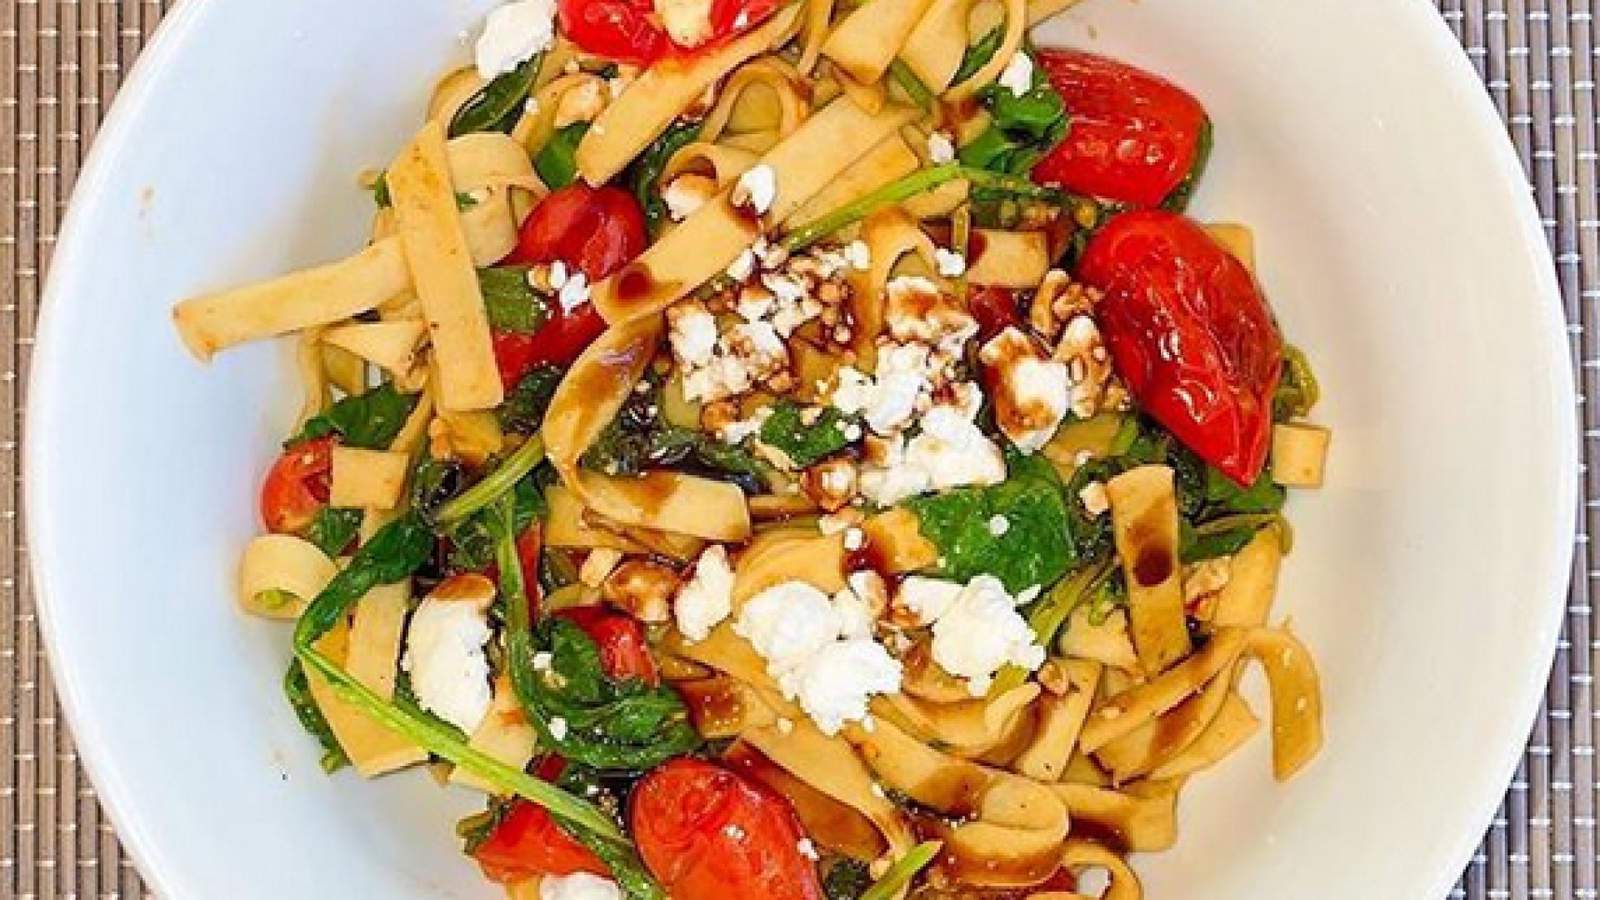 Celebrate National Pasta Day with noodles that are “Al Dente”